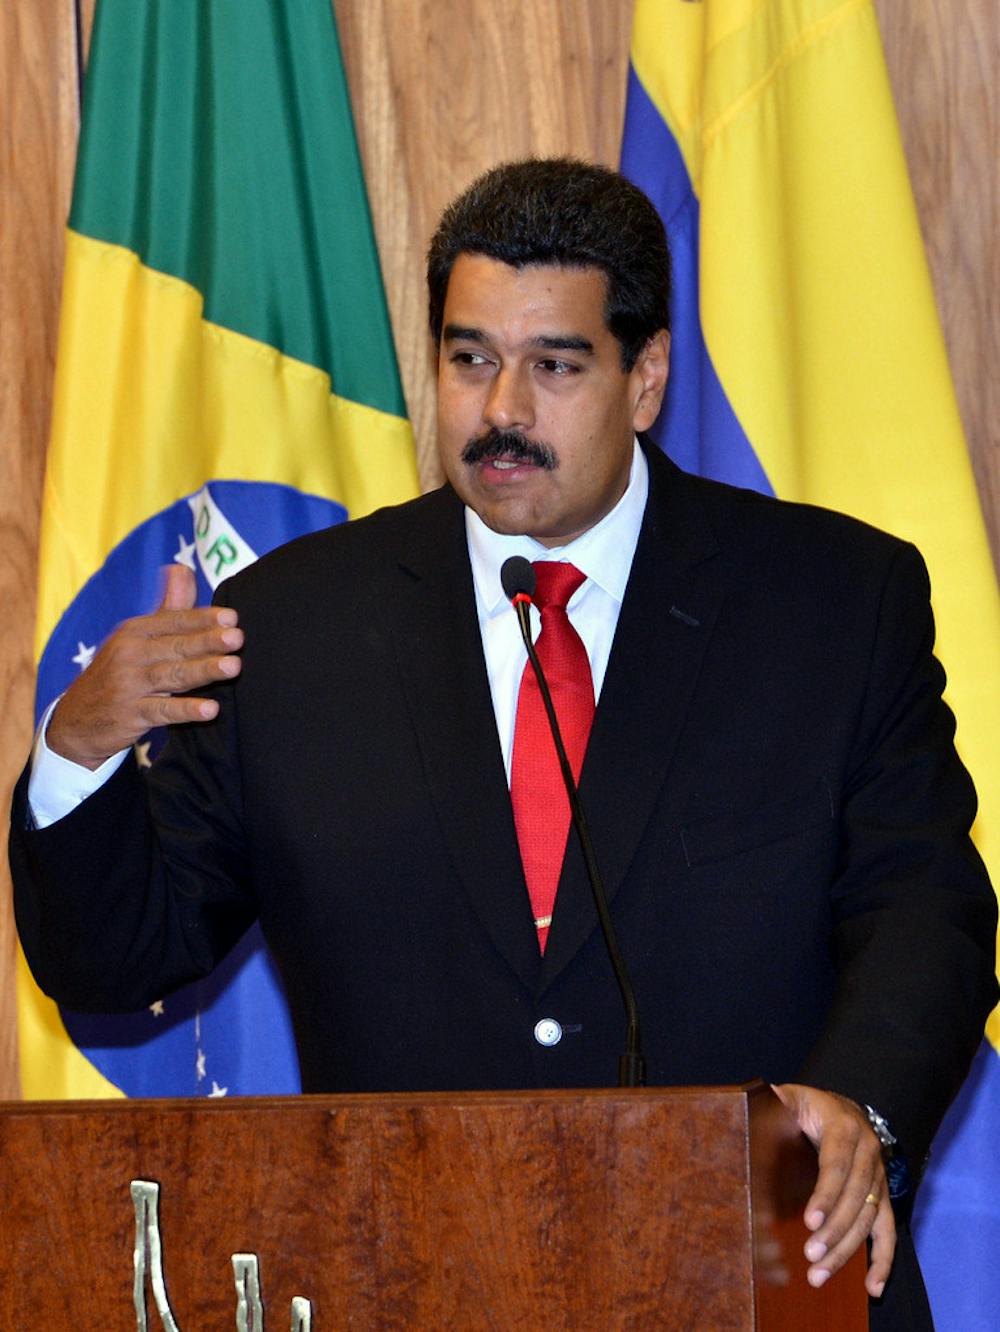 <p><em>As Venezuela gears up for a landmark presidential election in 2024, the country’s path towards a legitimate democracy remains hindered by ploys on the part of the government in power (Photo courtesy of Wikimedia Commons/“</em><a href="https://commons.wikimedia.org/wiki/File:Nicol%C3%A1s_Maduro_(2013).jpg" target=""><em>Nicolás Maduro (2013)</em></a><em>” by Valter Campanato. September 5, 2013). </em></p>